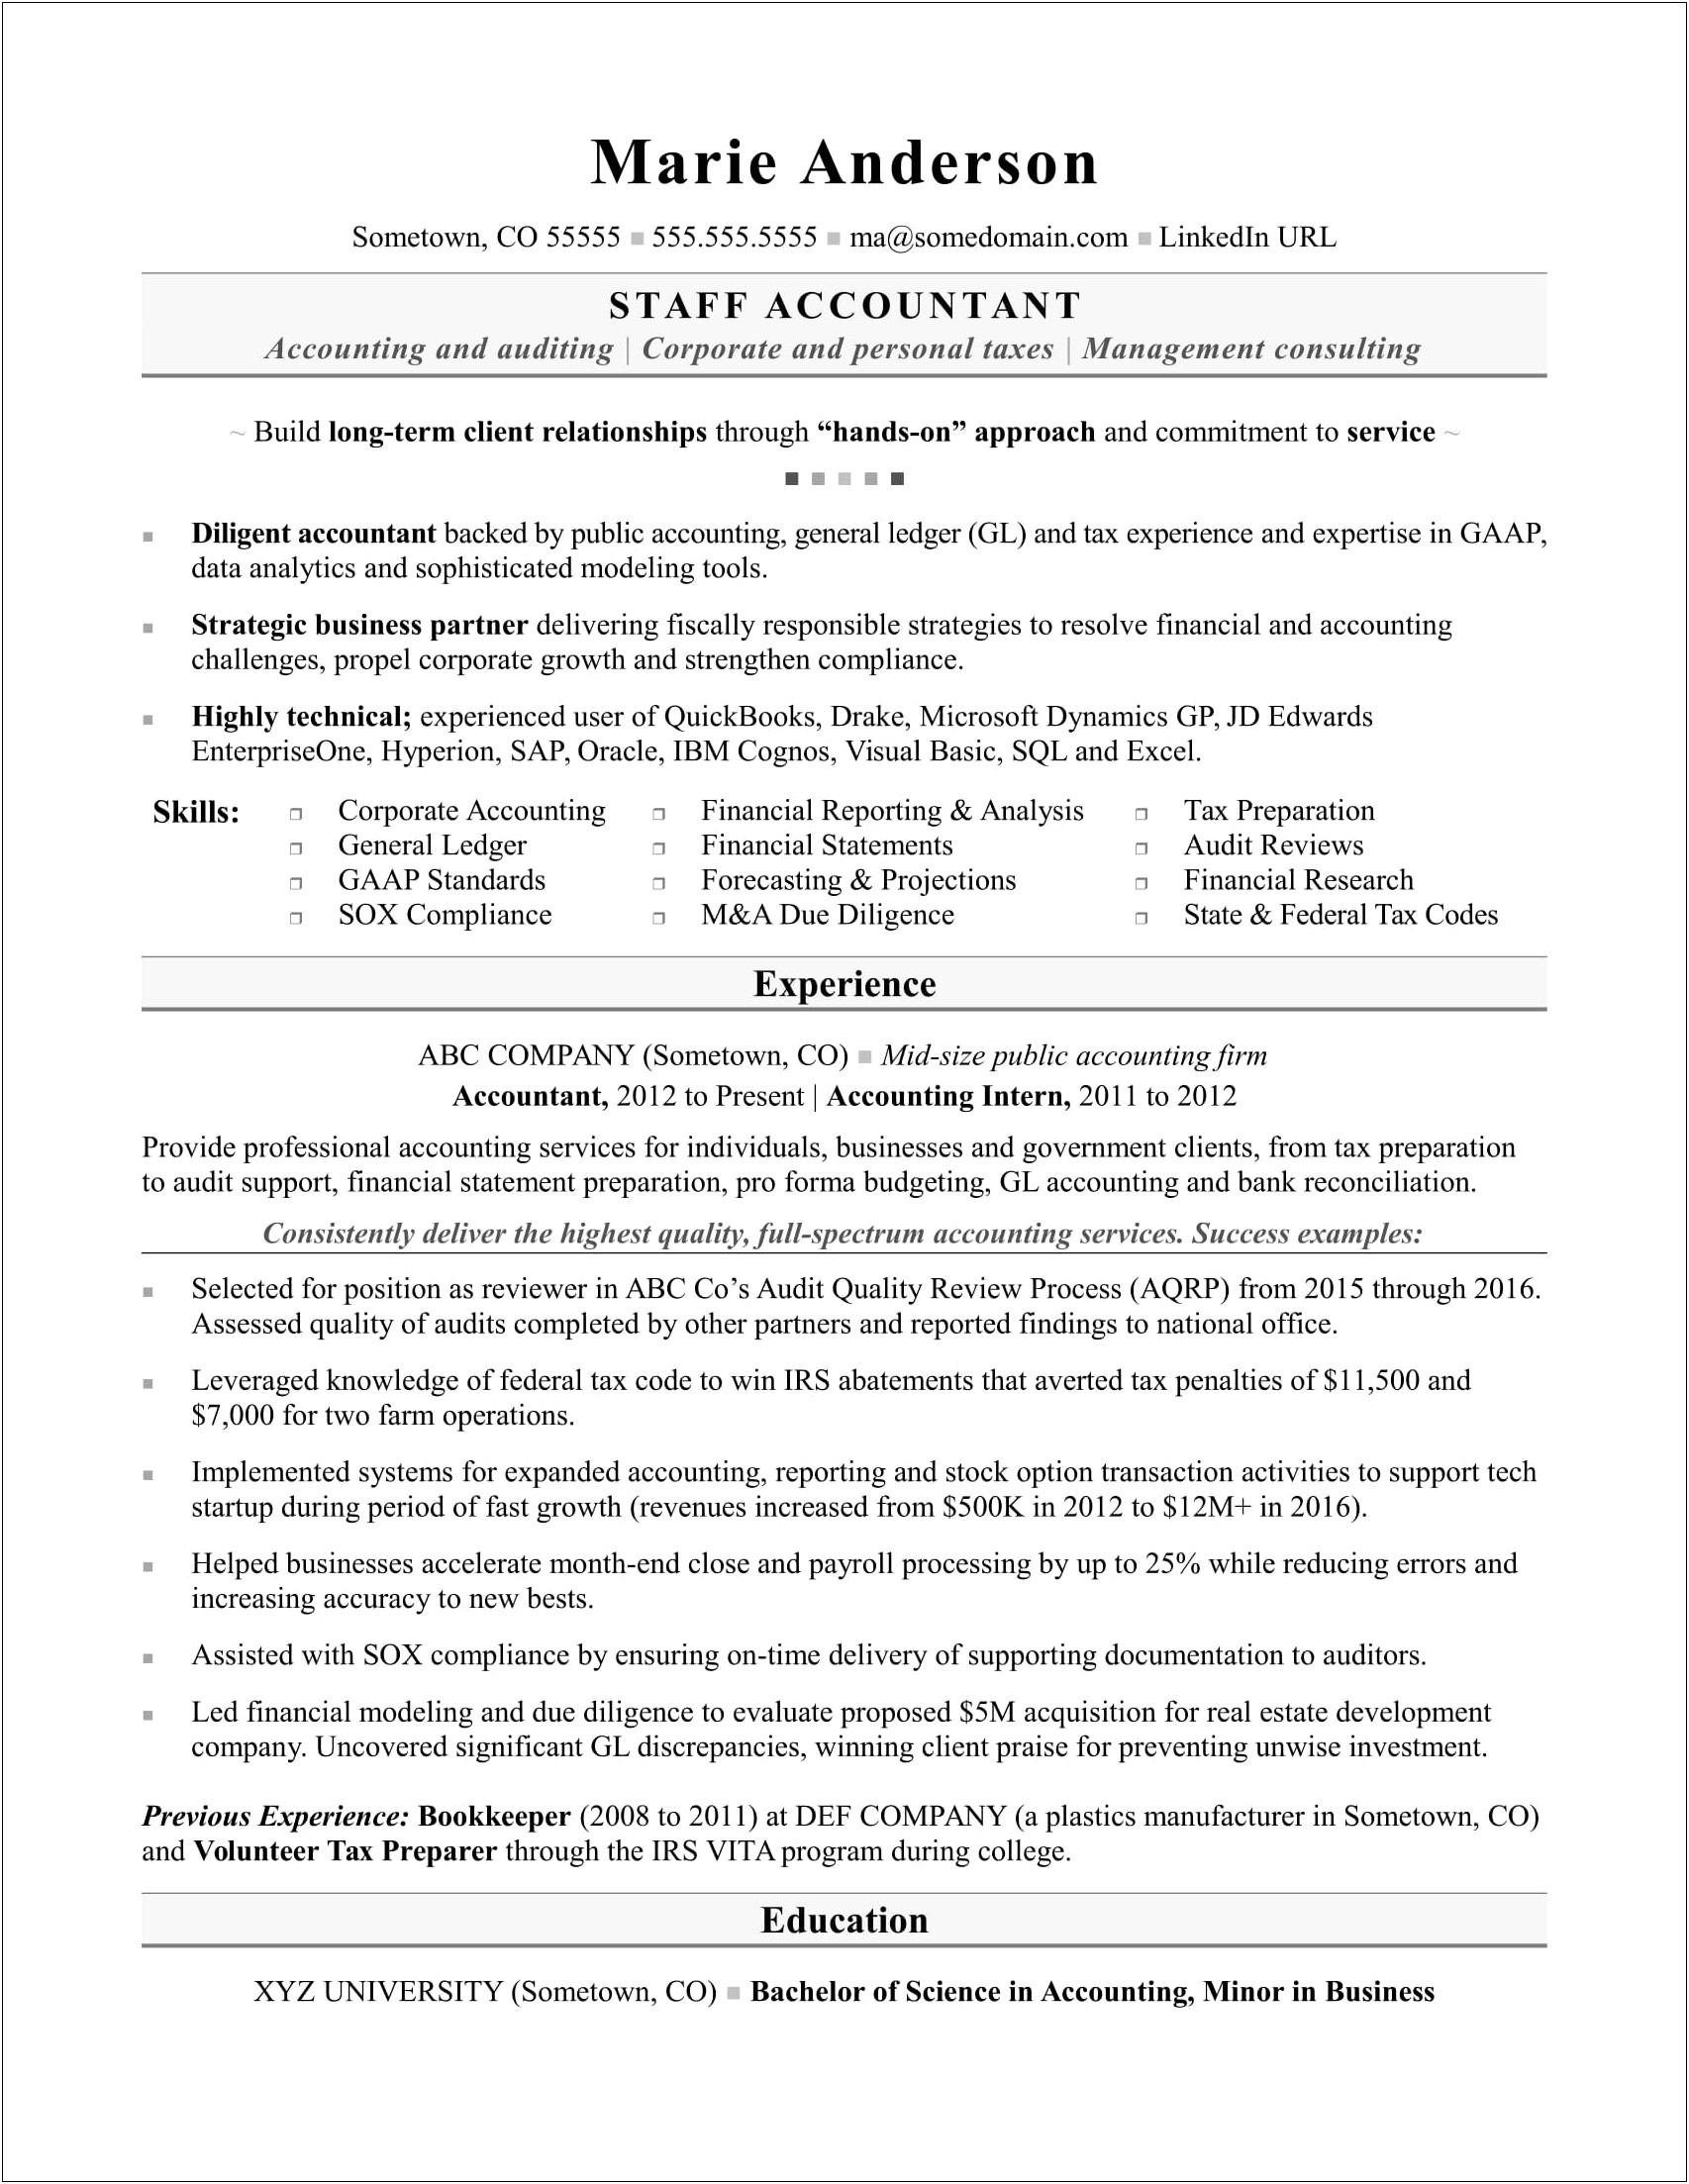 Professional Objective For An Accounting Resume